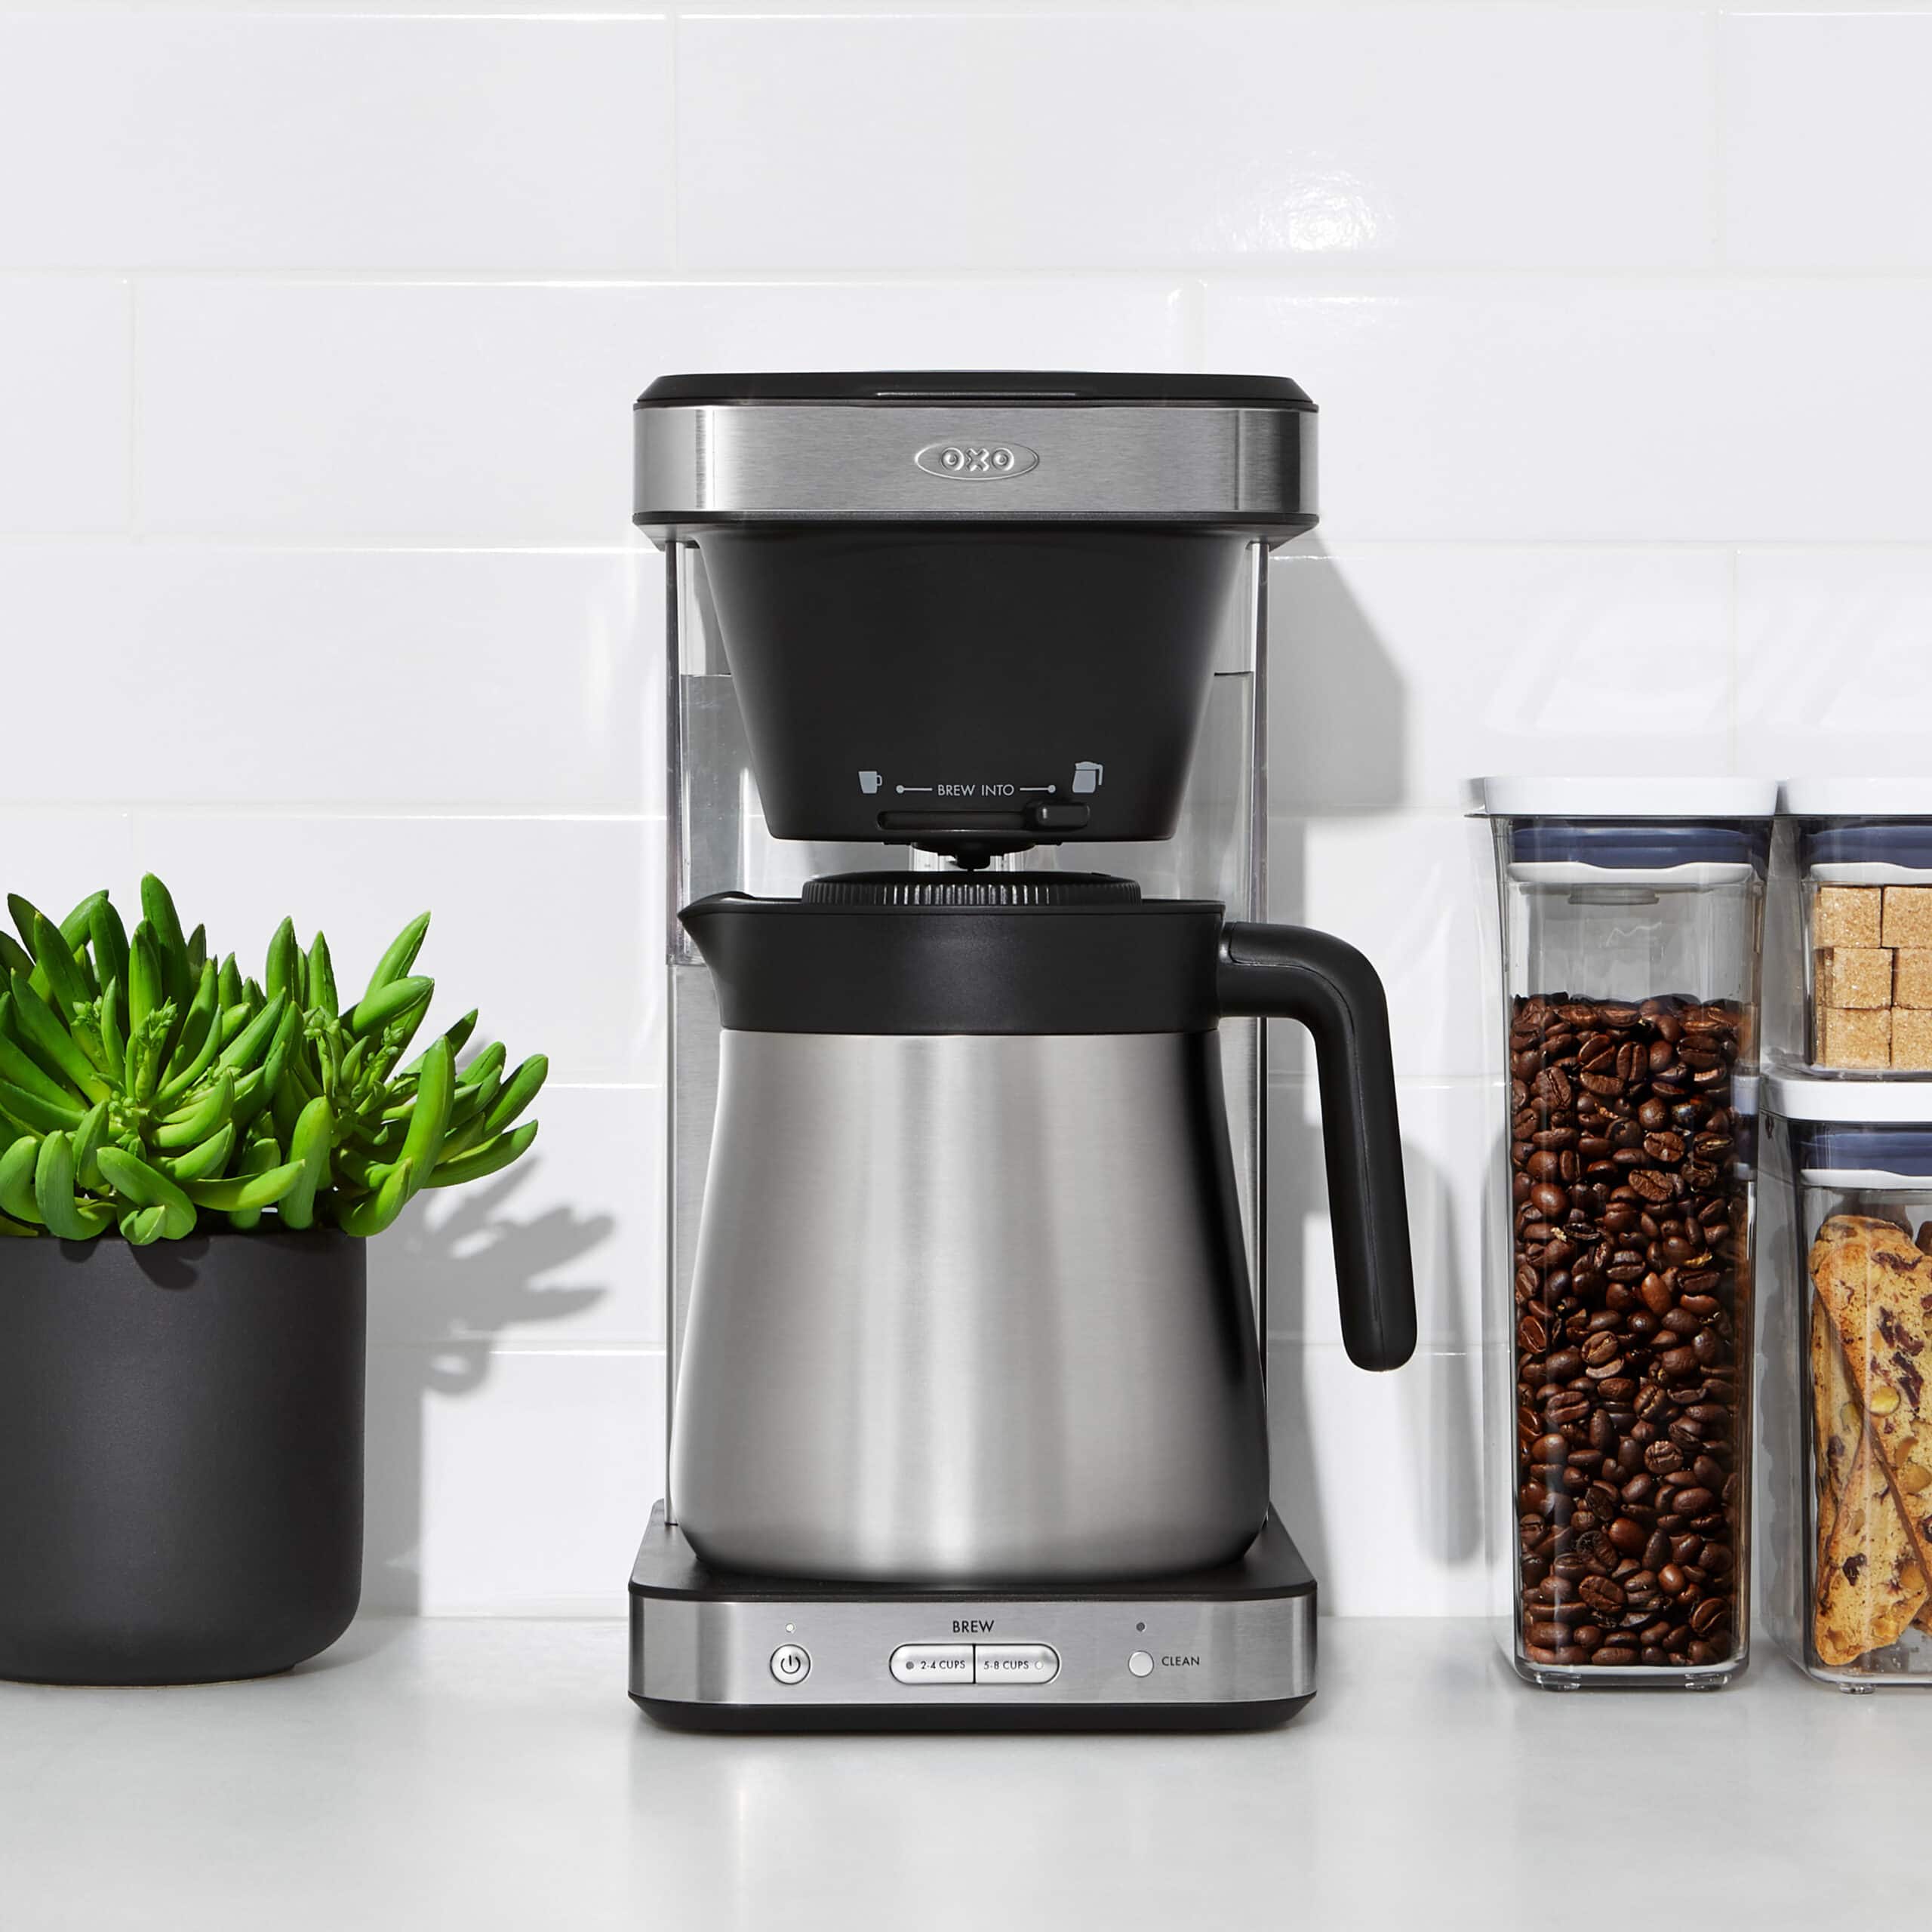 OXO 8 cup coffee maker next to a plant